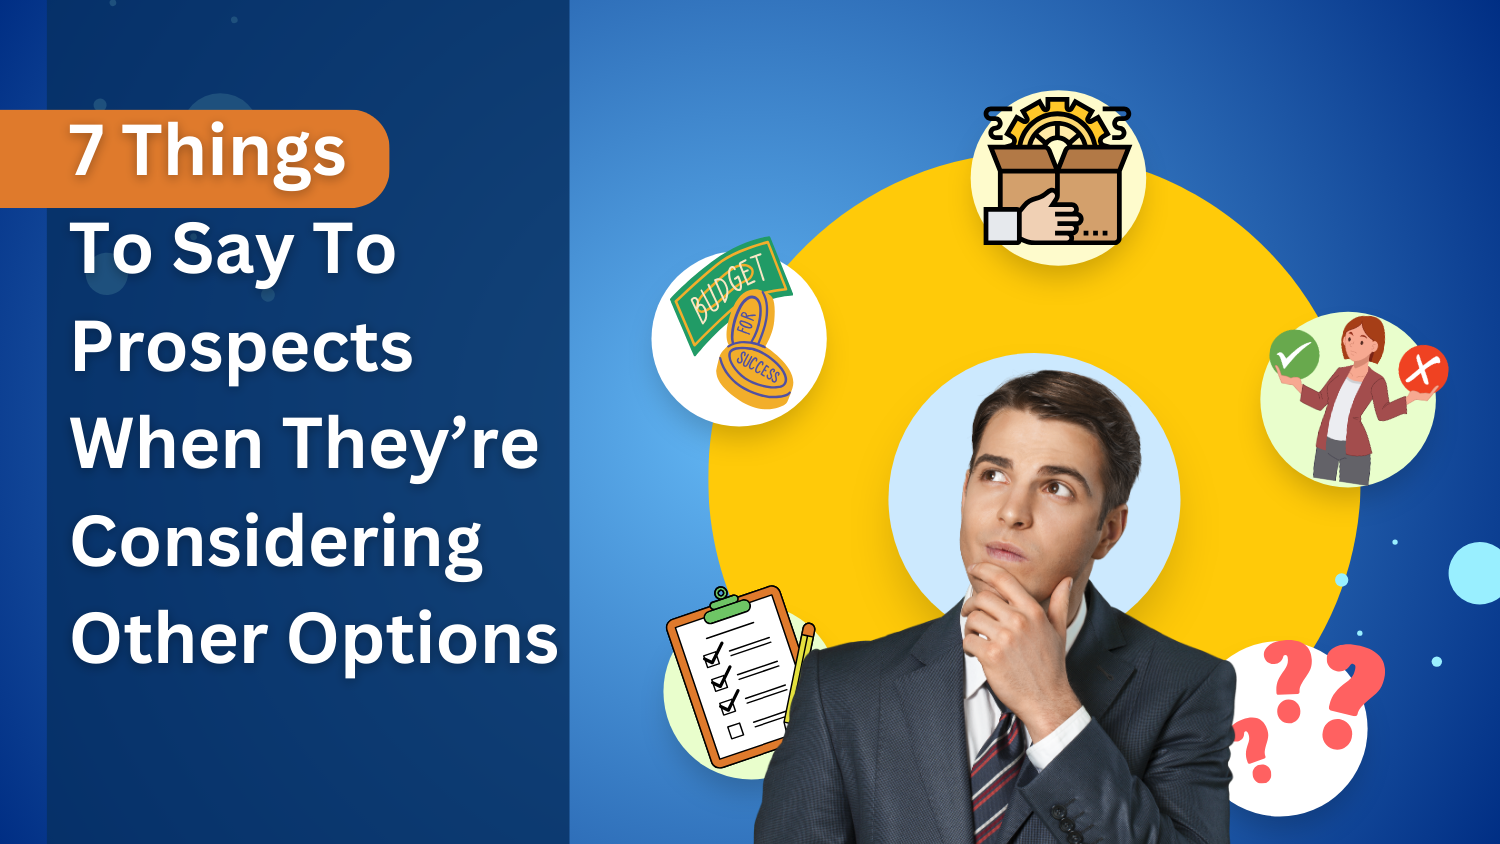 7 Things To Say To Prospects When They’re Considering Other Options